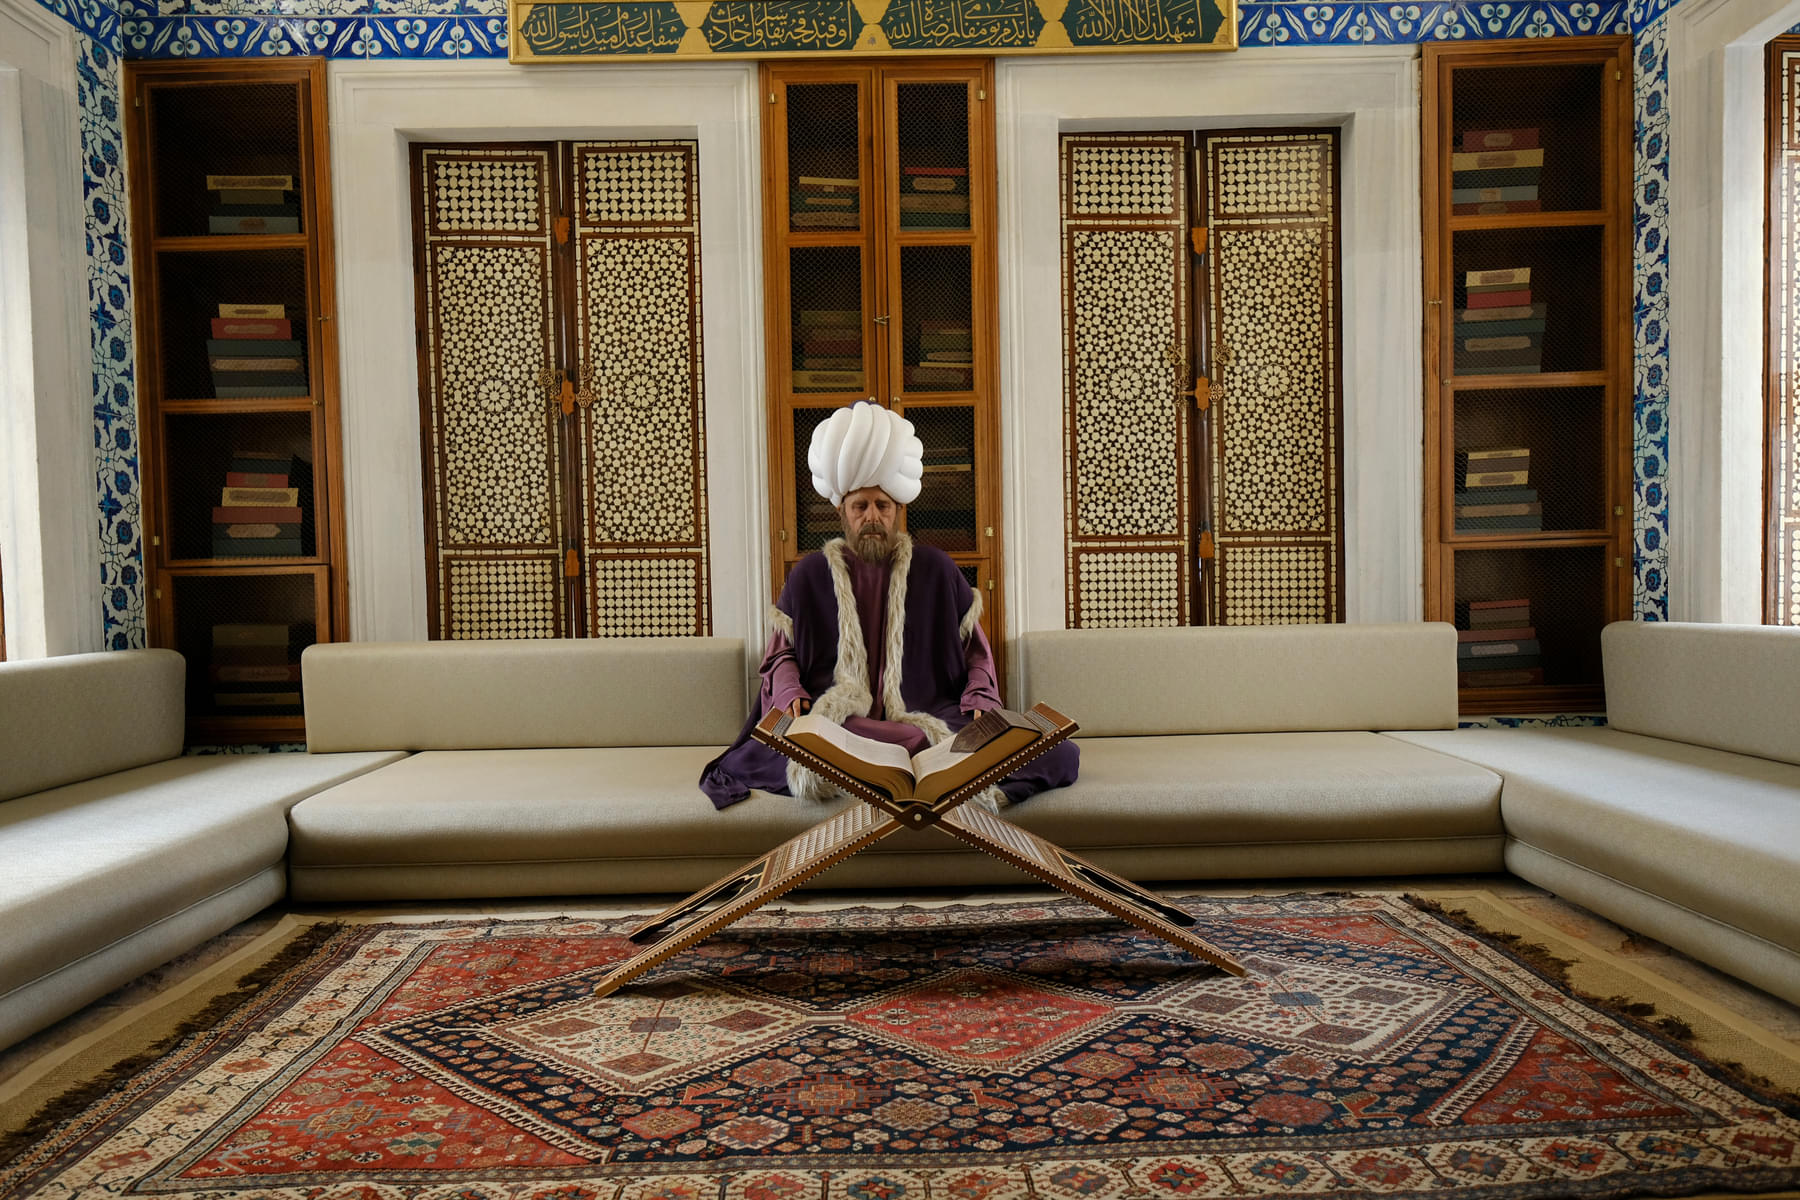  See the regal library inside the magnificent Topkapi Palace